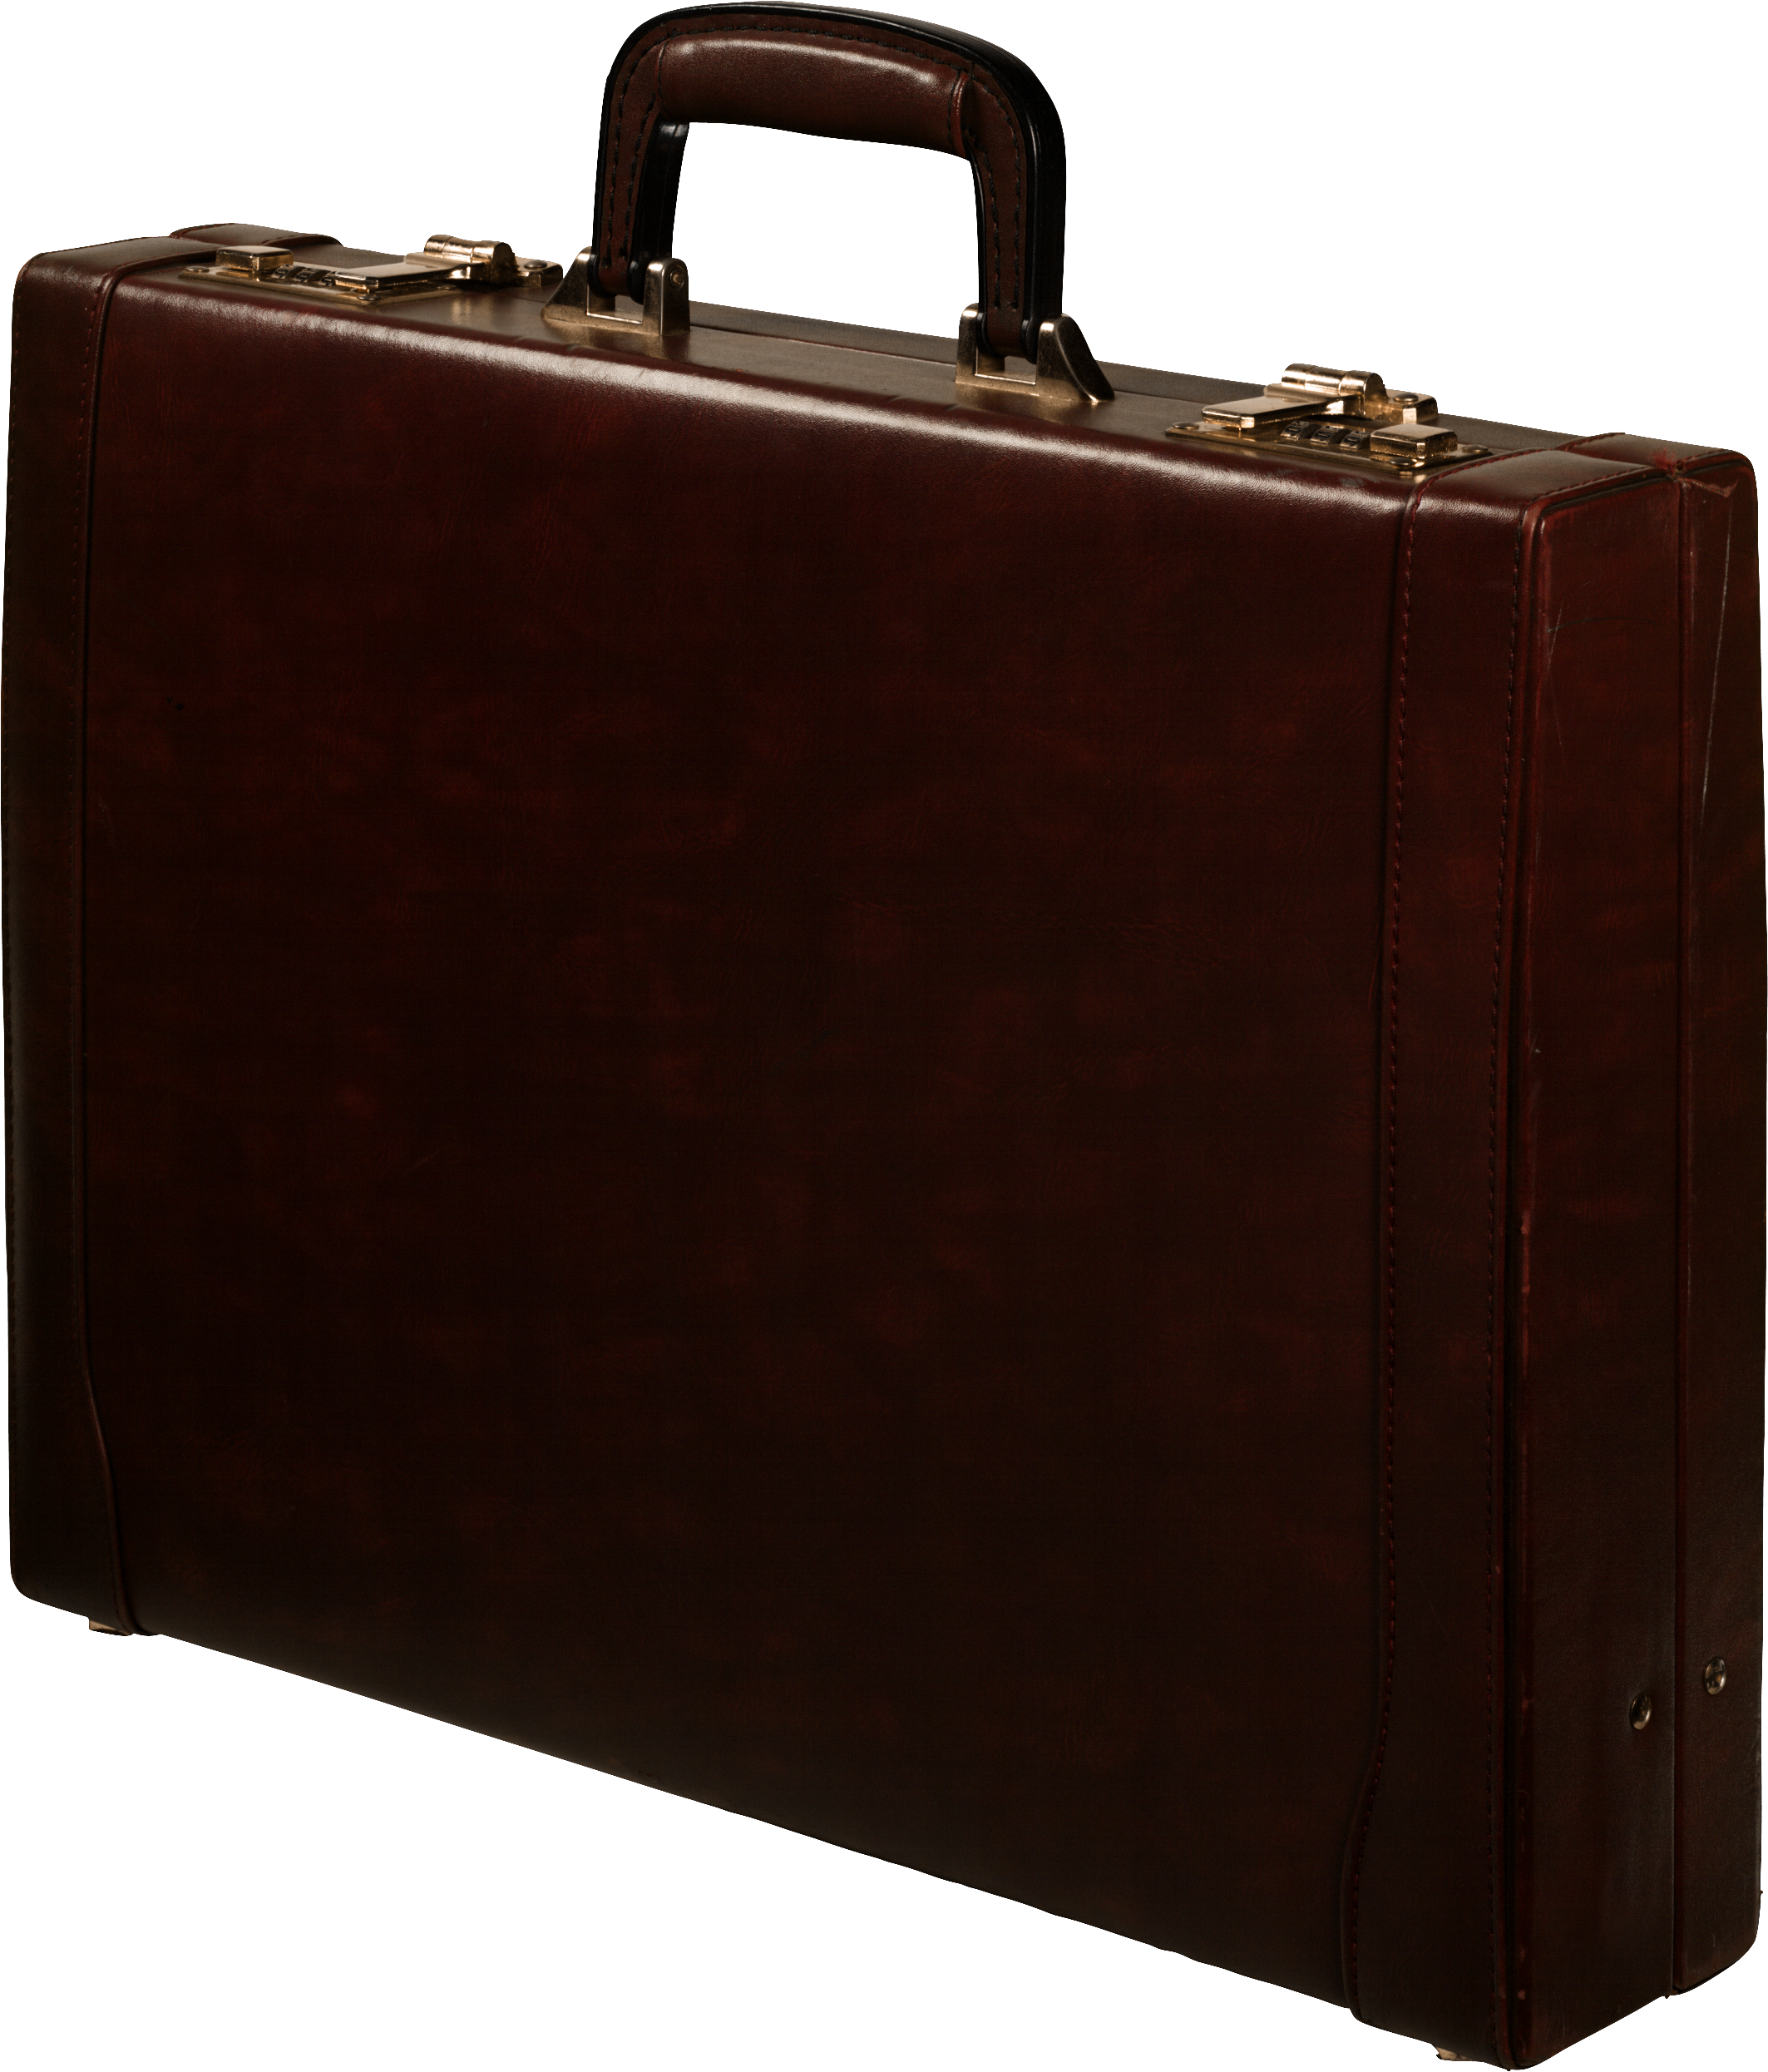 Briefcase Hd Png Hdpng.com 2126 - Briefcase, Transparent background PNG HD thumbnail